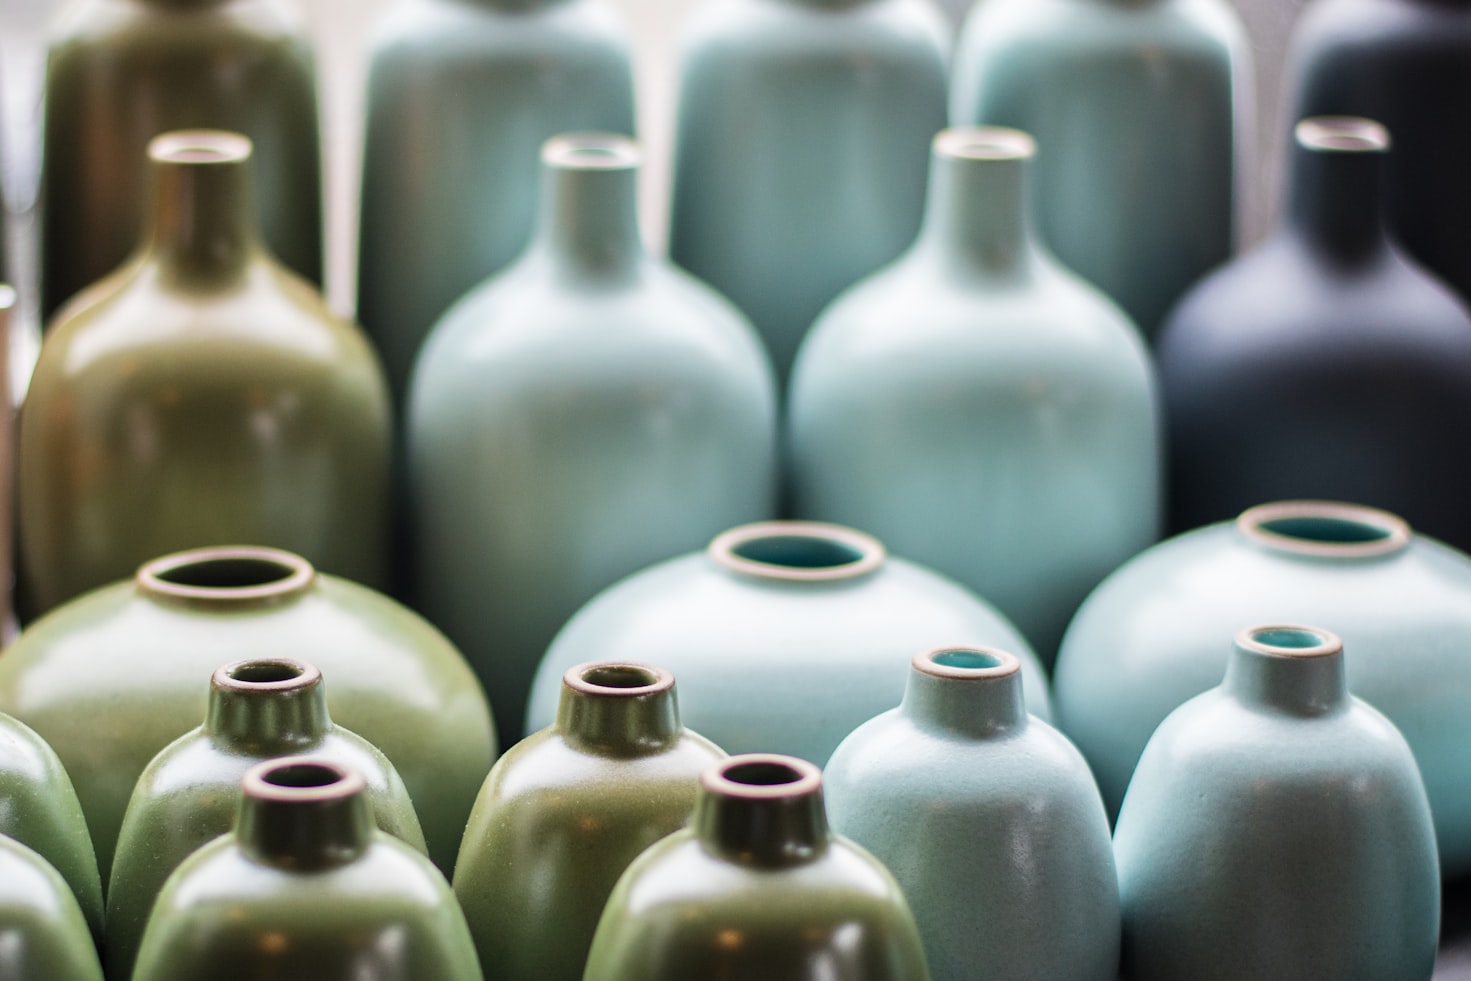 How Ceramics Are Made?  Ceramics are made through the process of forming, drying, firing, and glazing.